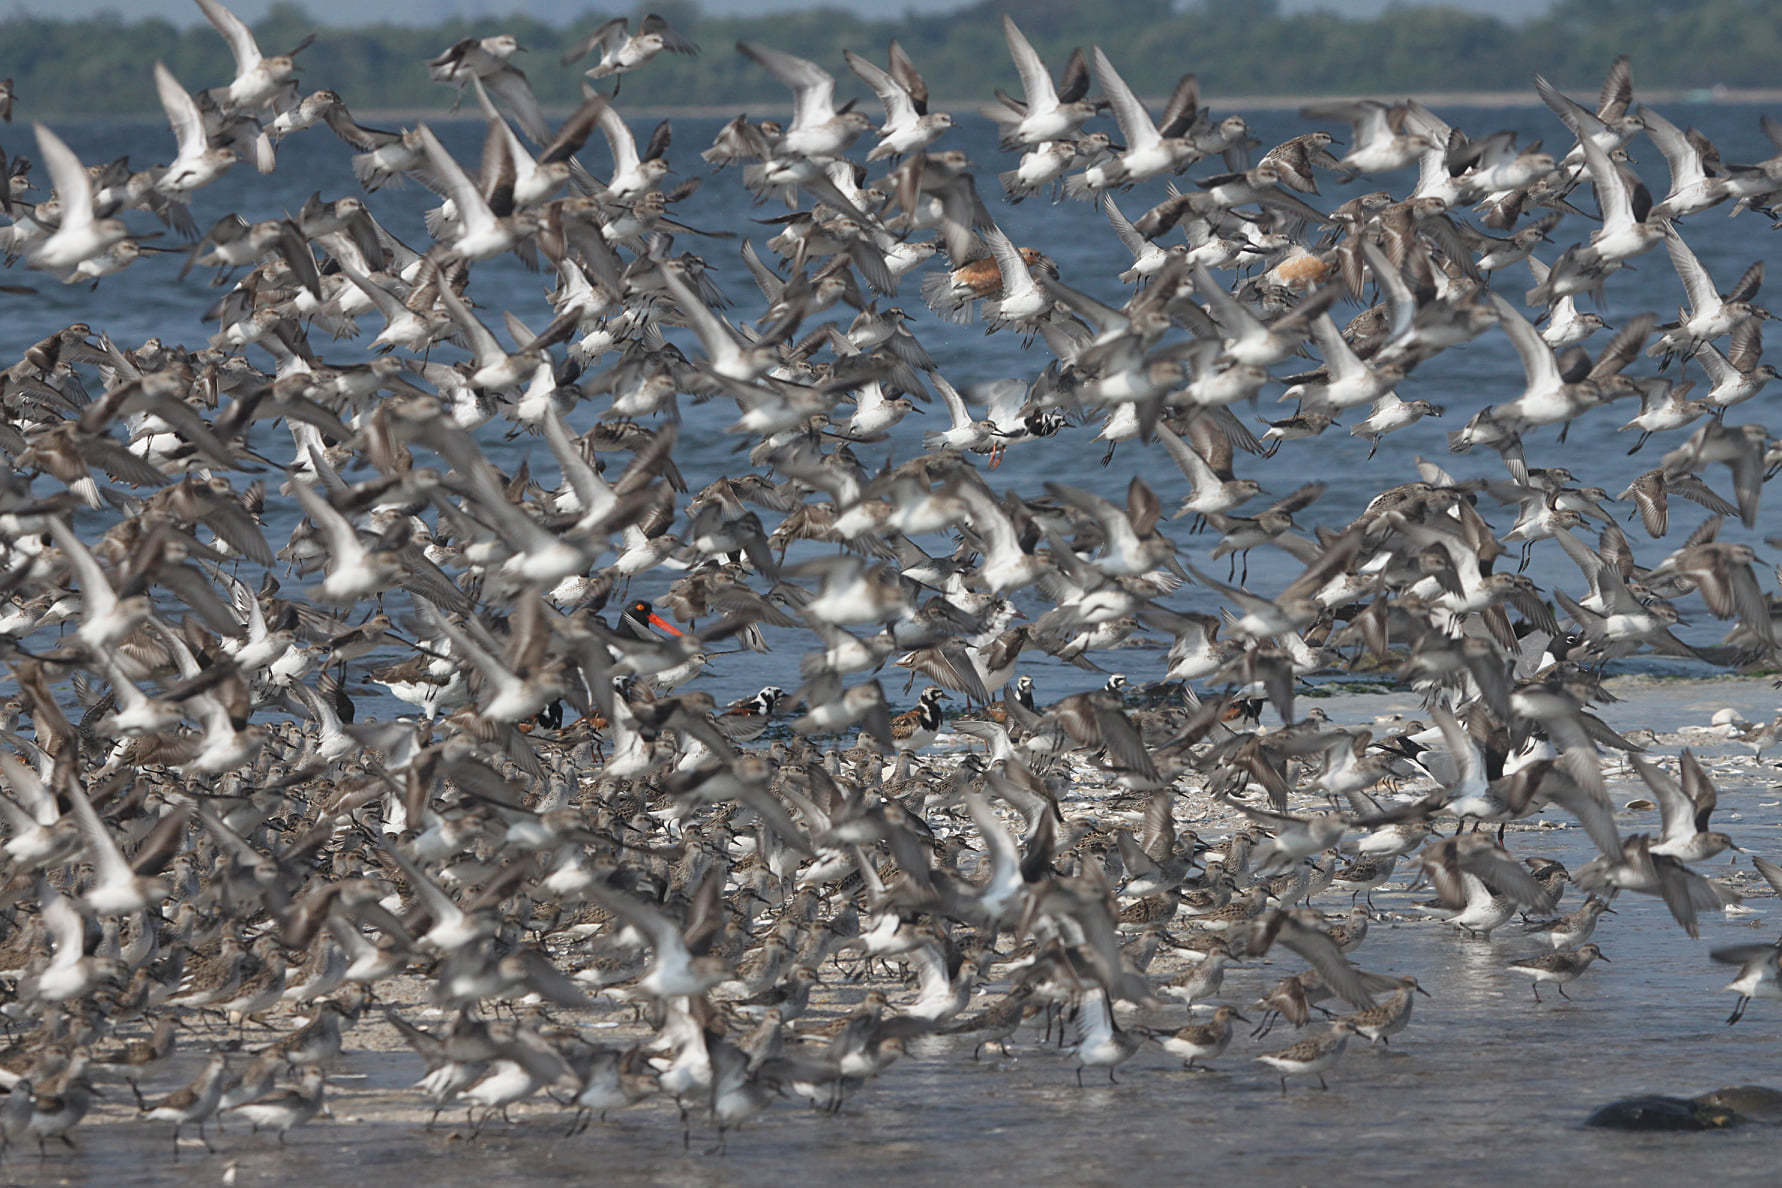 Red Knots, Semipalmated Sandpipers, Ruddy Turnstones, and American Oystercatcher feed amongst spawning Horseshoe Crabs. Photo: <a href="https://www.facebook.com/don.riepe.14" target="_blank" >Don Riepe</a>